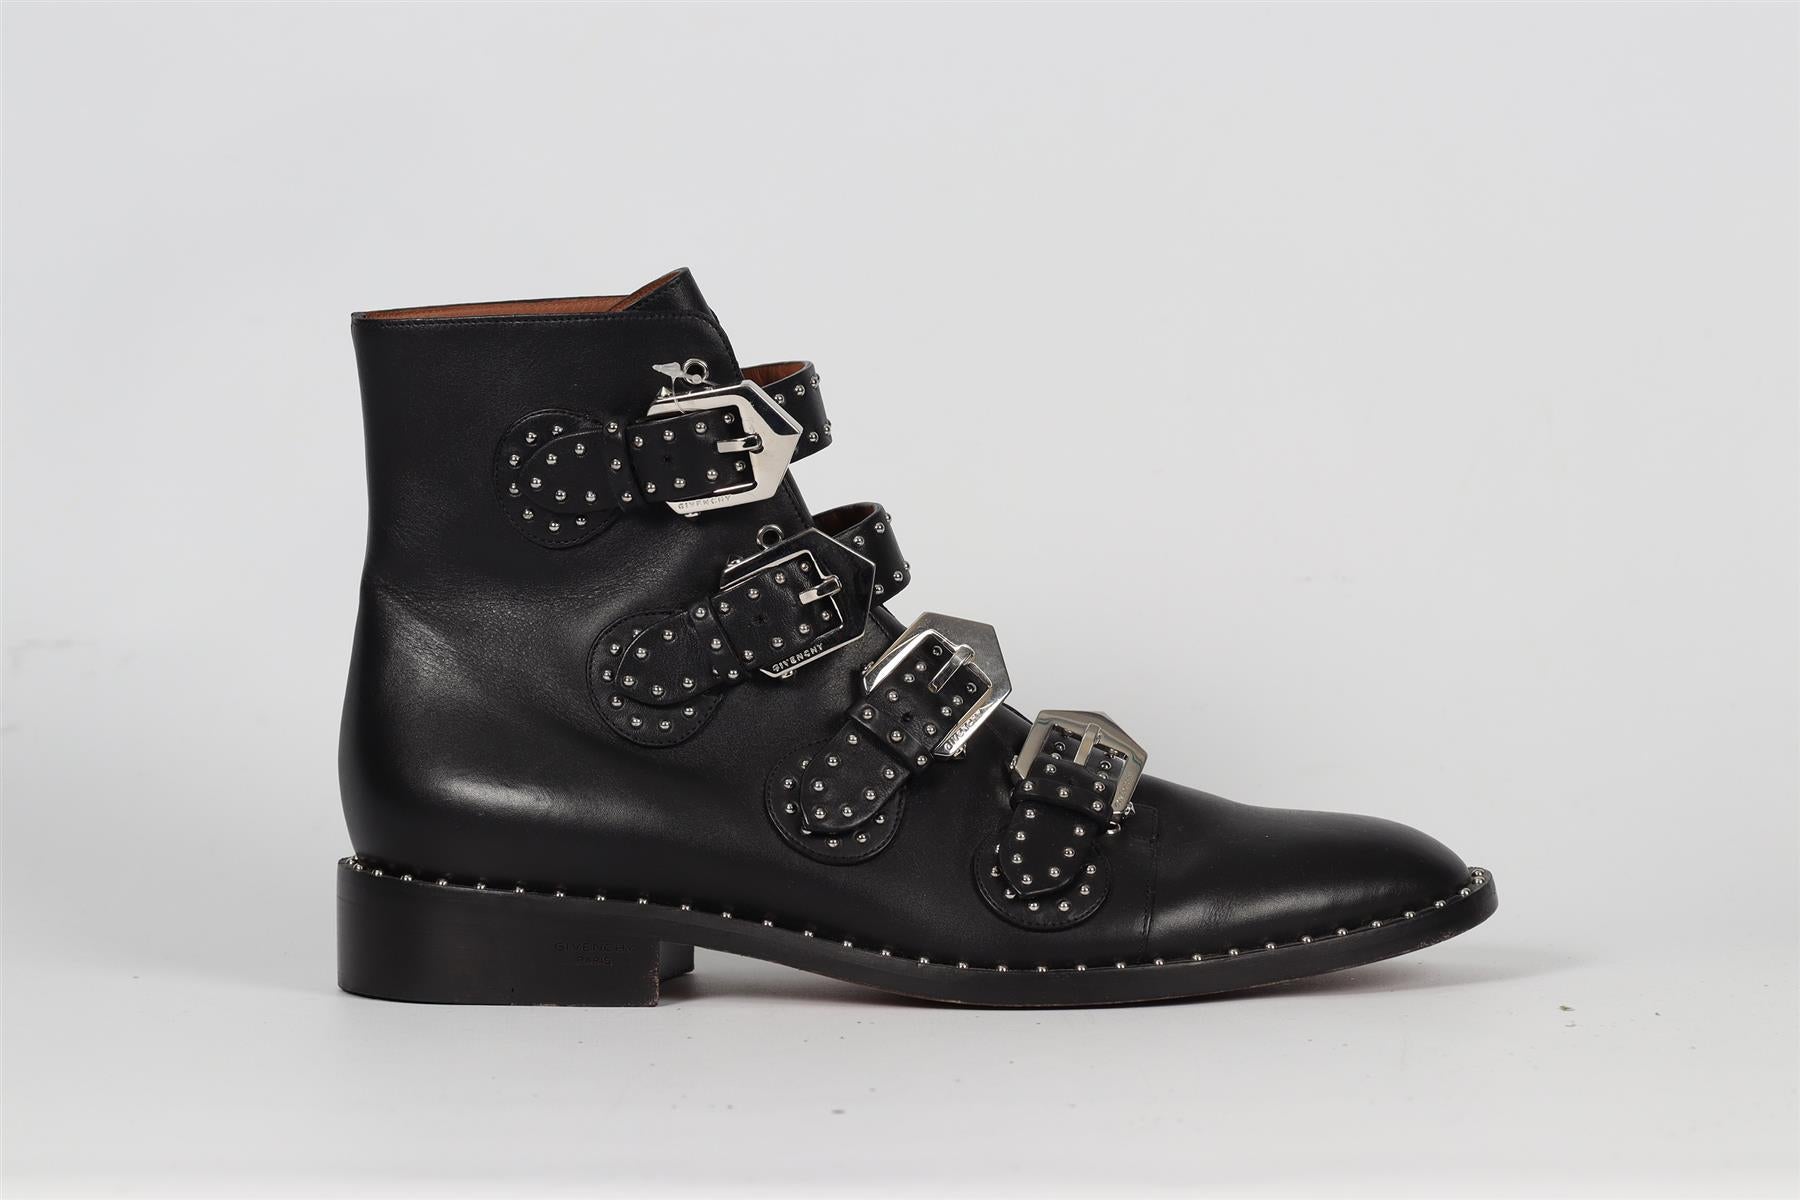 GIVENCHY LEATHER ANKLE BOOTS EU 41 UK 8 US 11